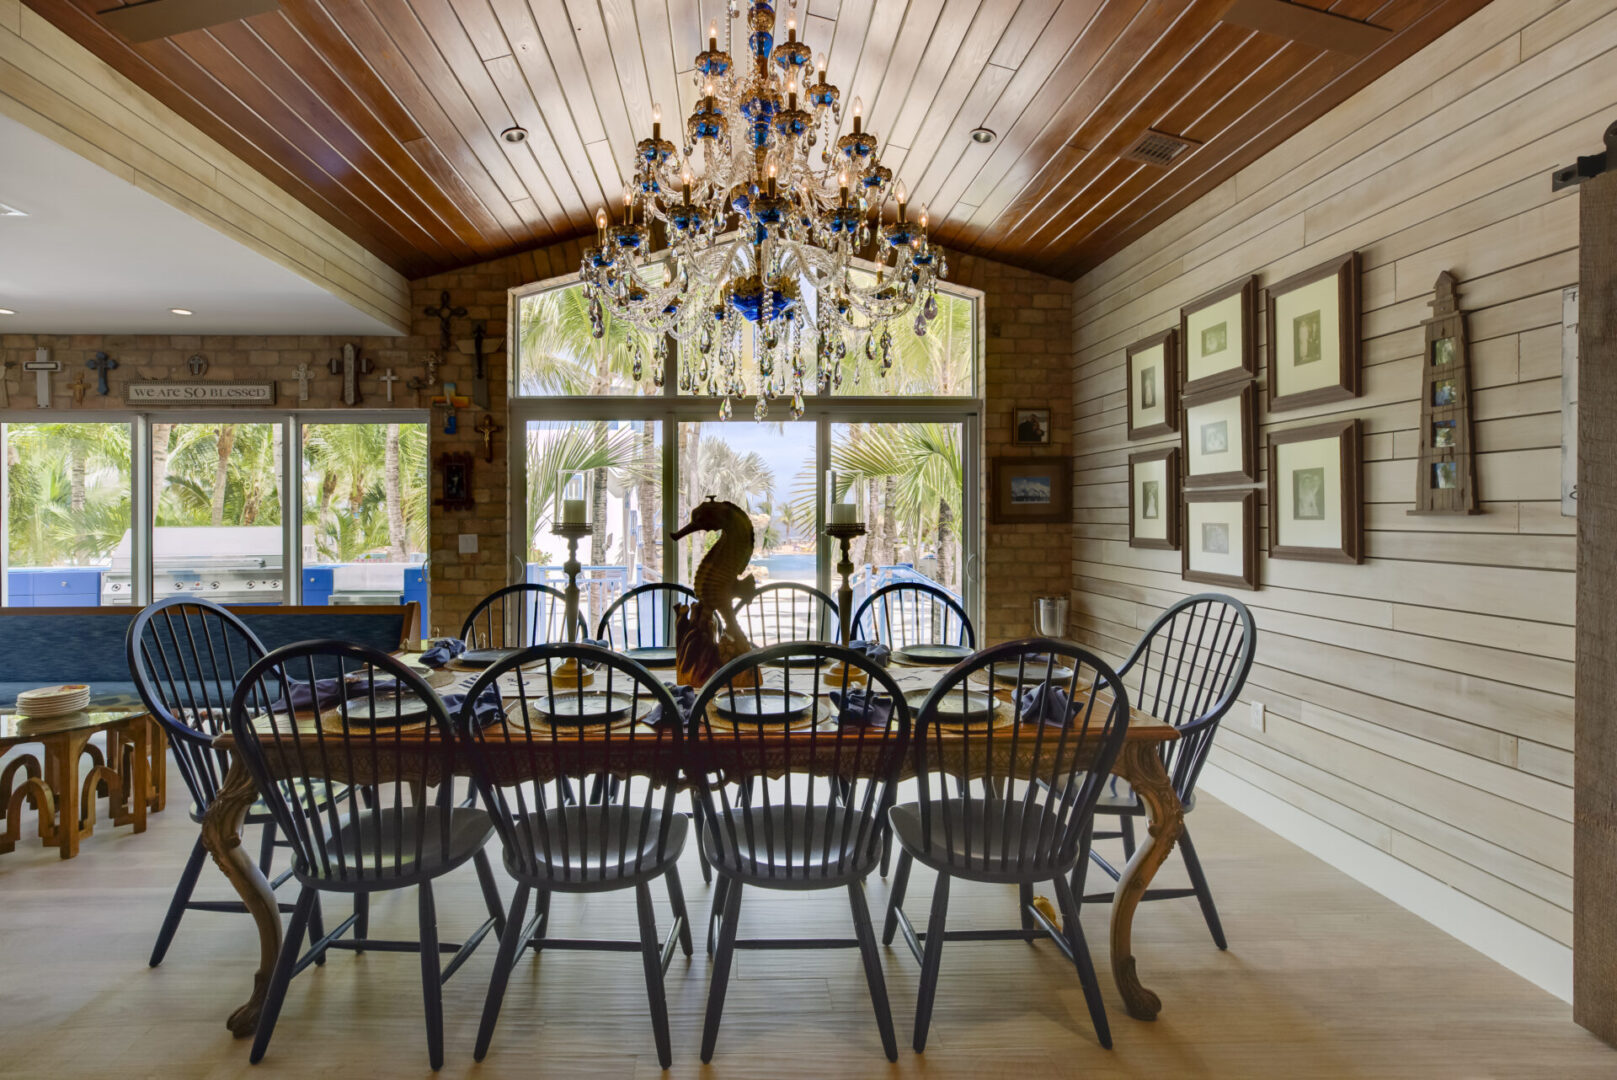 A large dining room table with chairs around it.